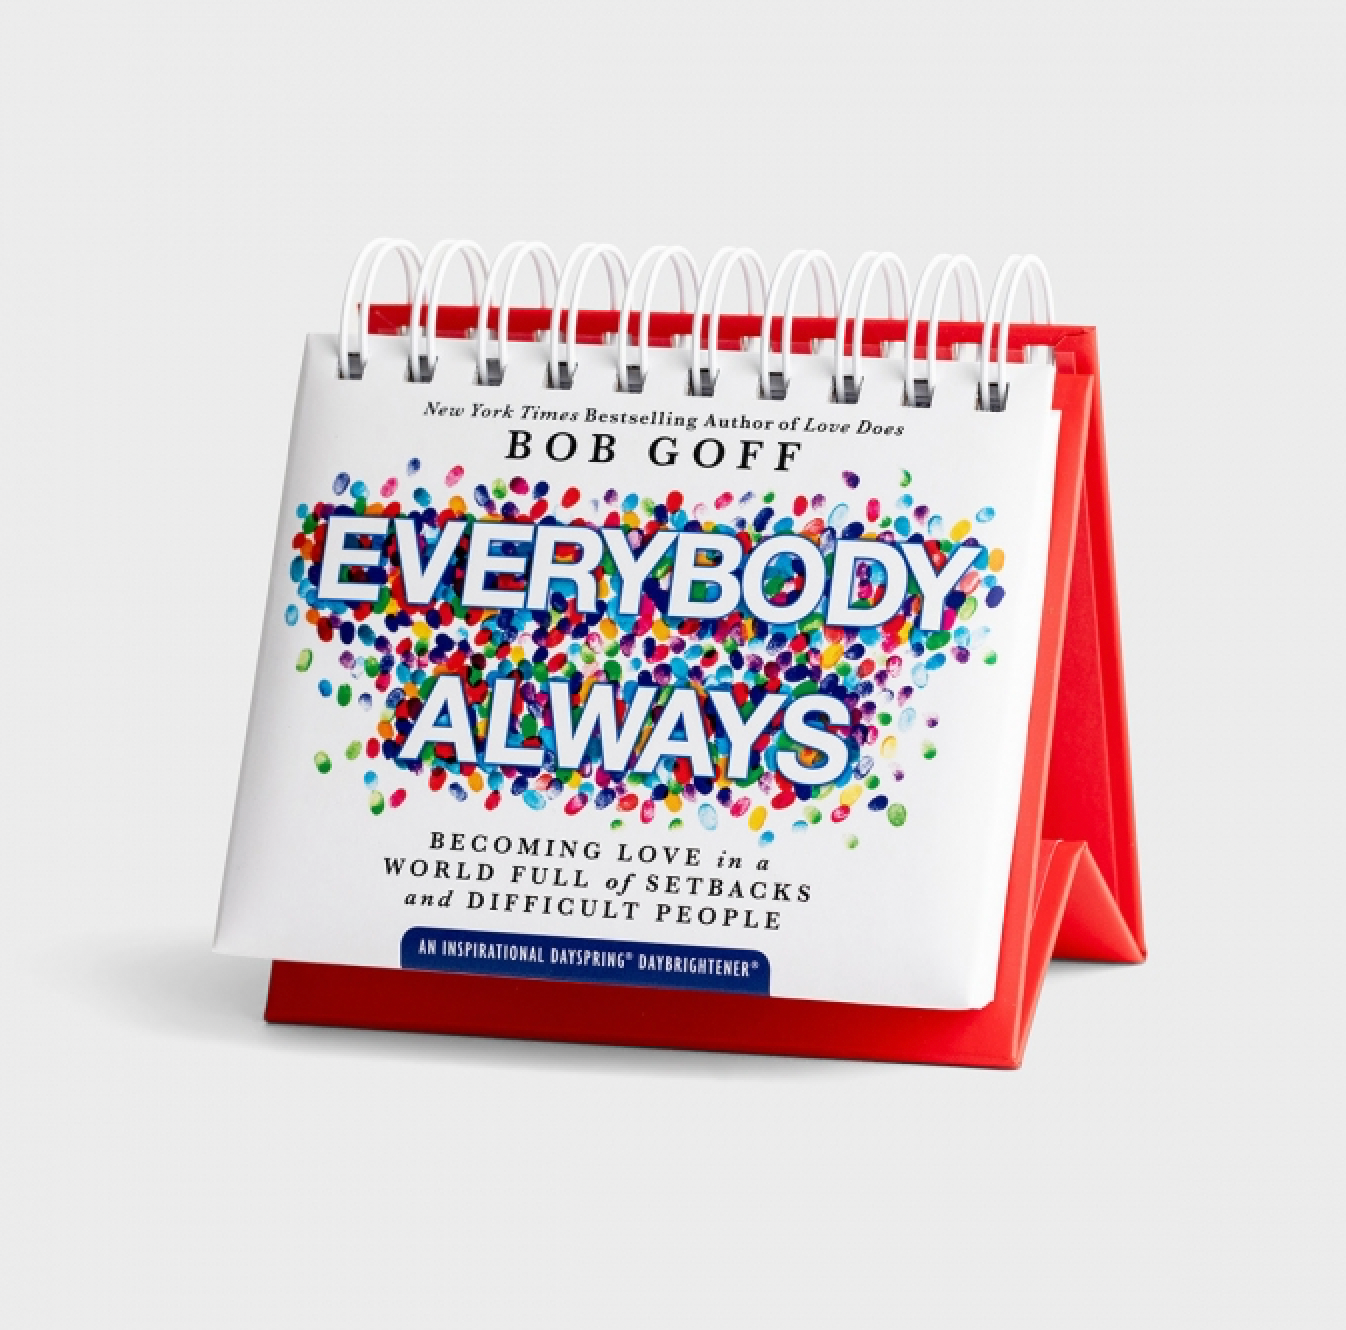 Everybody Always: Becoming Love in a World Full of Setbacks and Difficult People DayBrightener